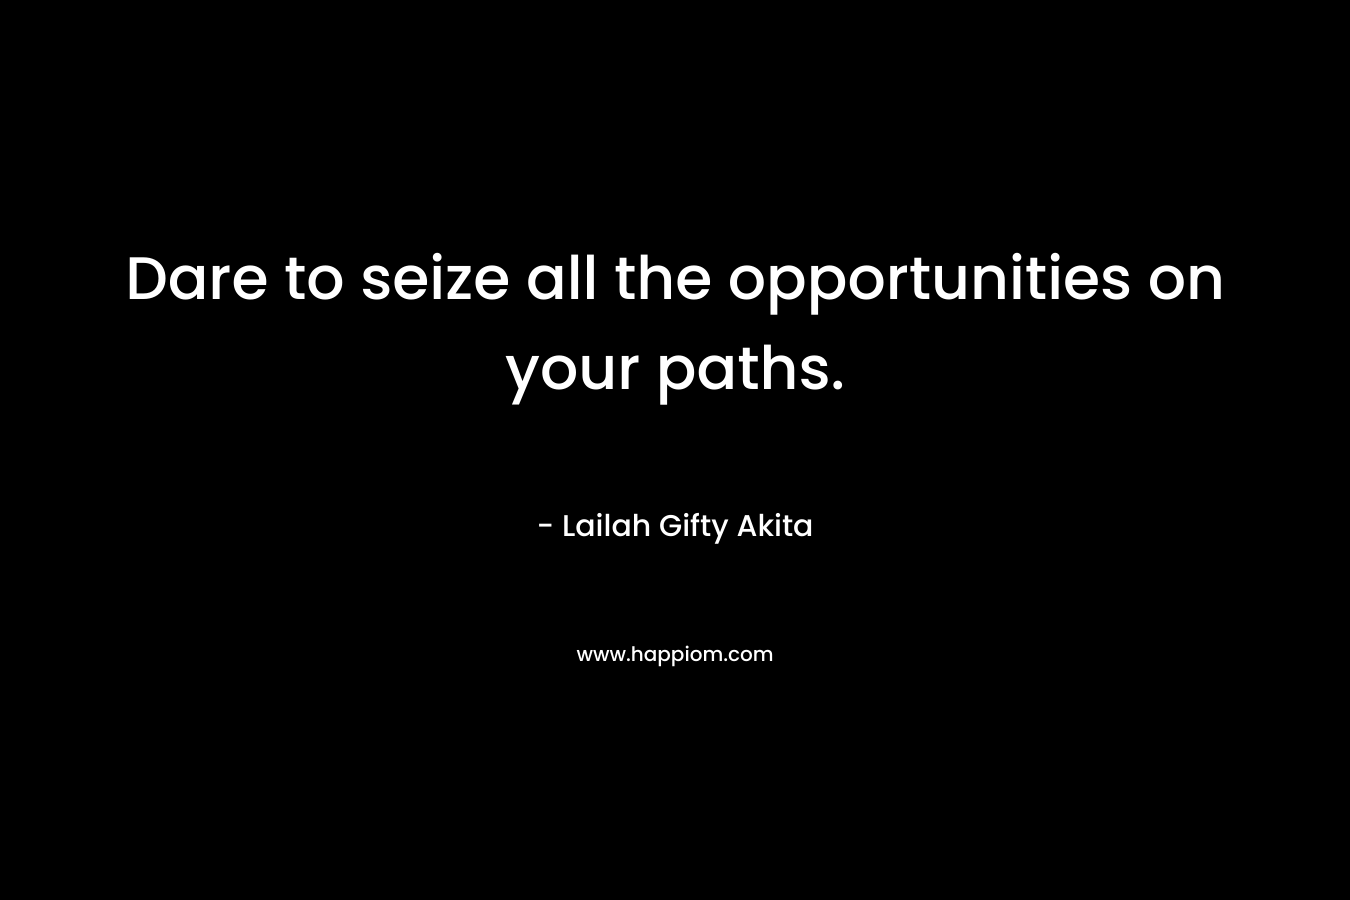 Dare to seize all the opportunities on your paths.